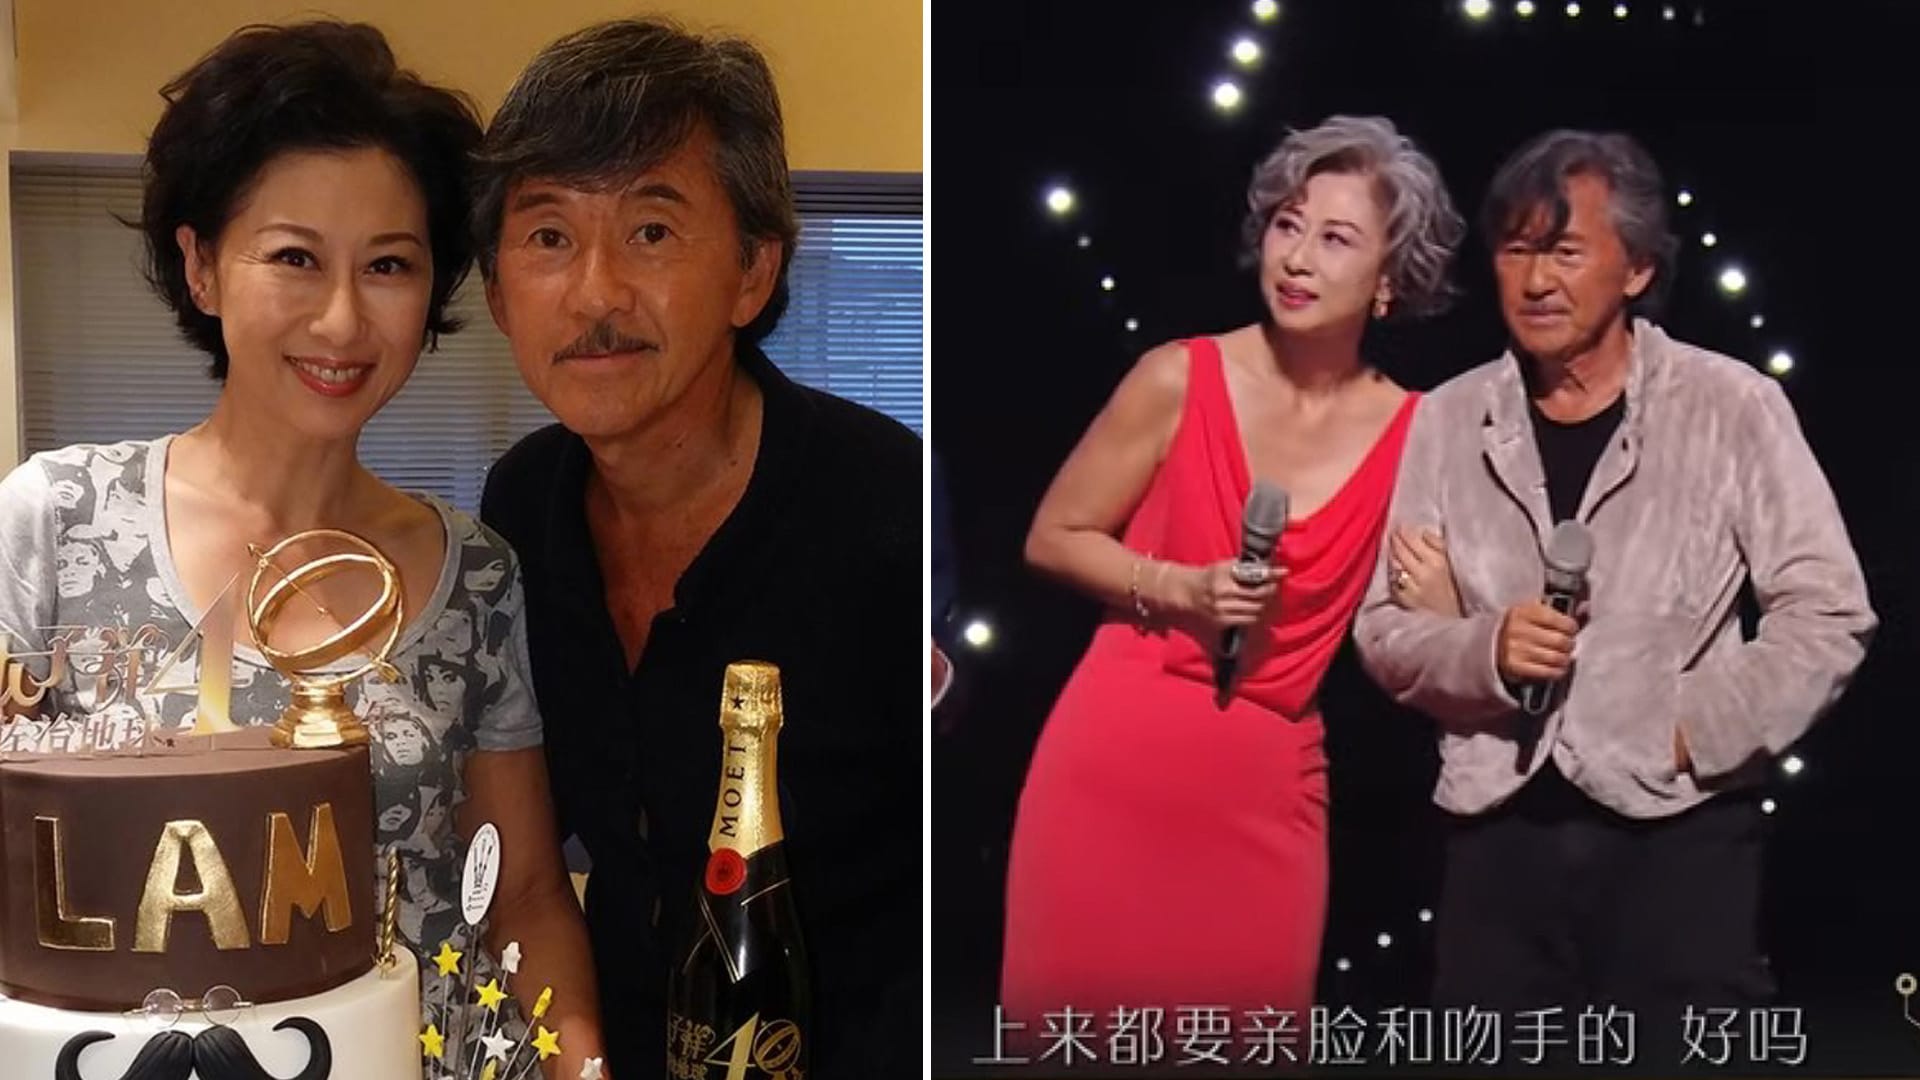 George Lam And Sally Yeh, Who Are One Of Showbiz’s Most Loving Couples, Have Been Sleeping In Separate Rooms For Many Years